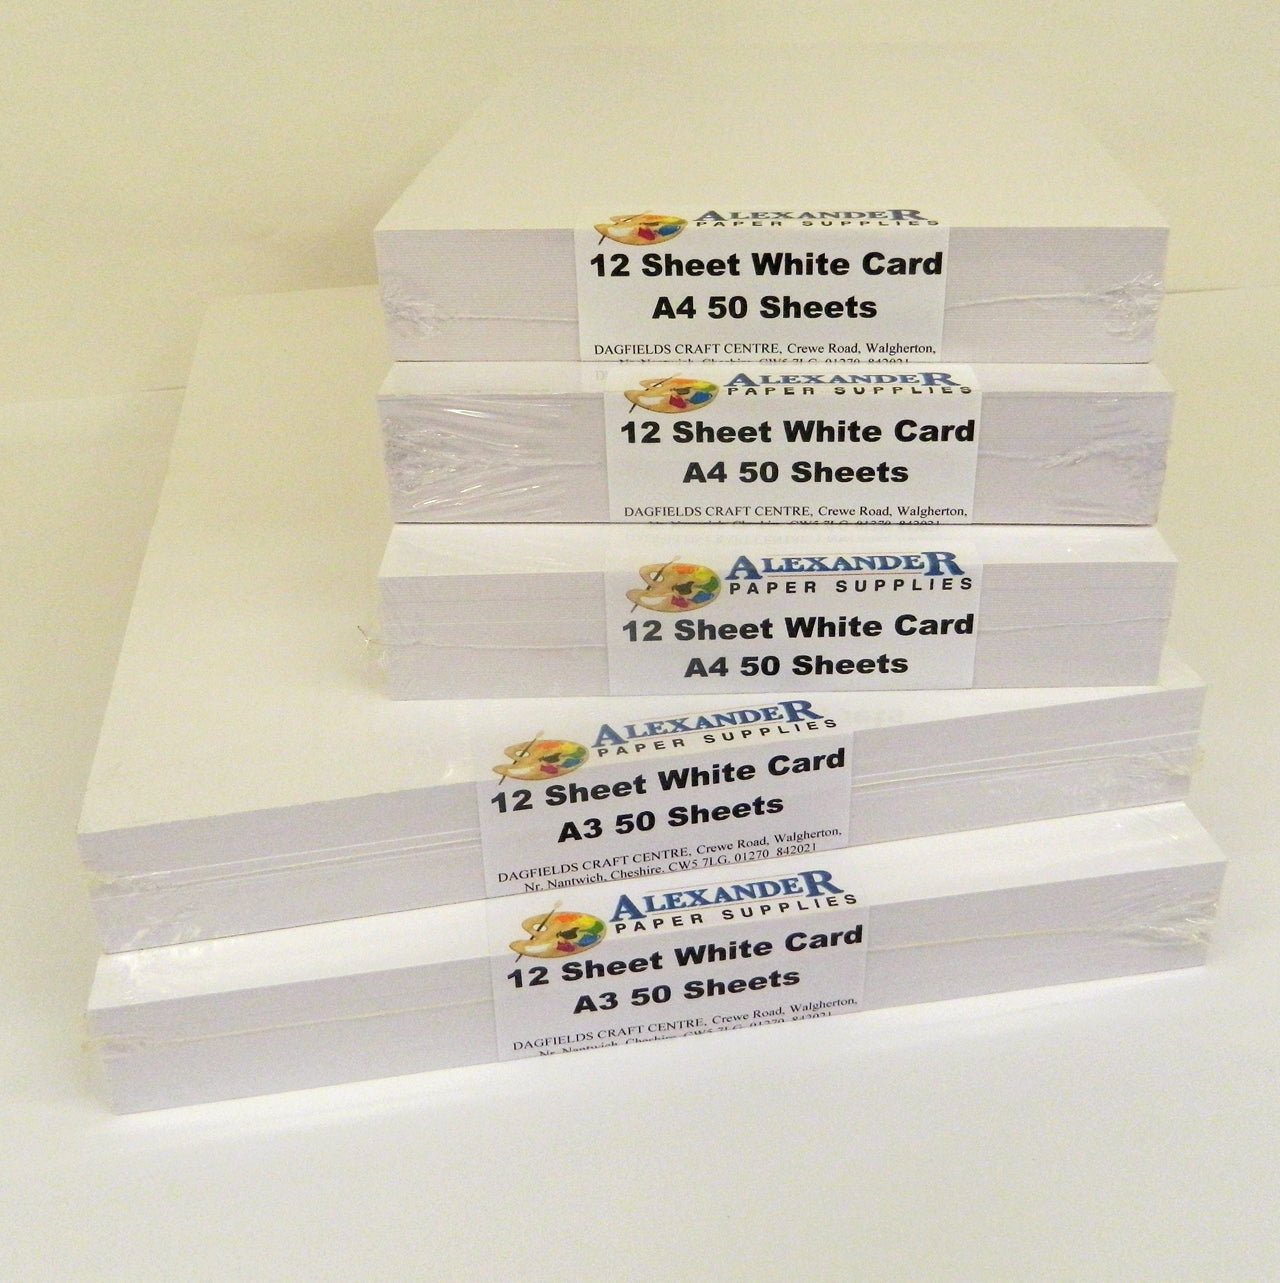 Stack of packs of white card